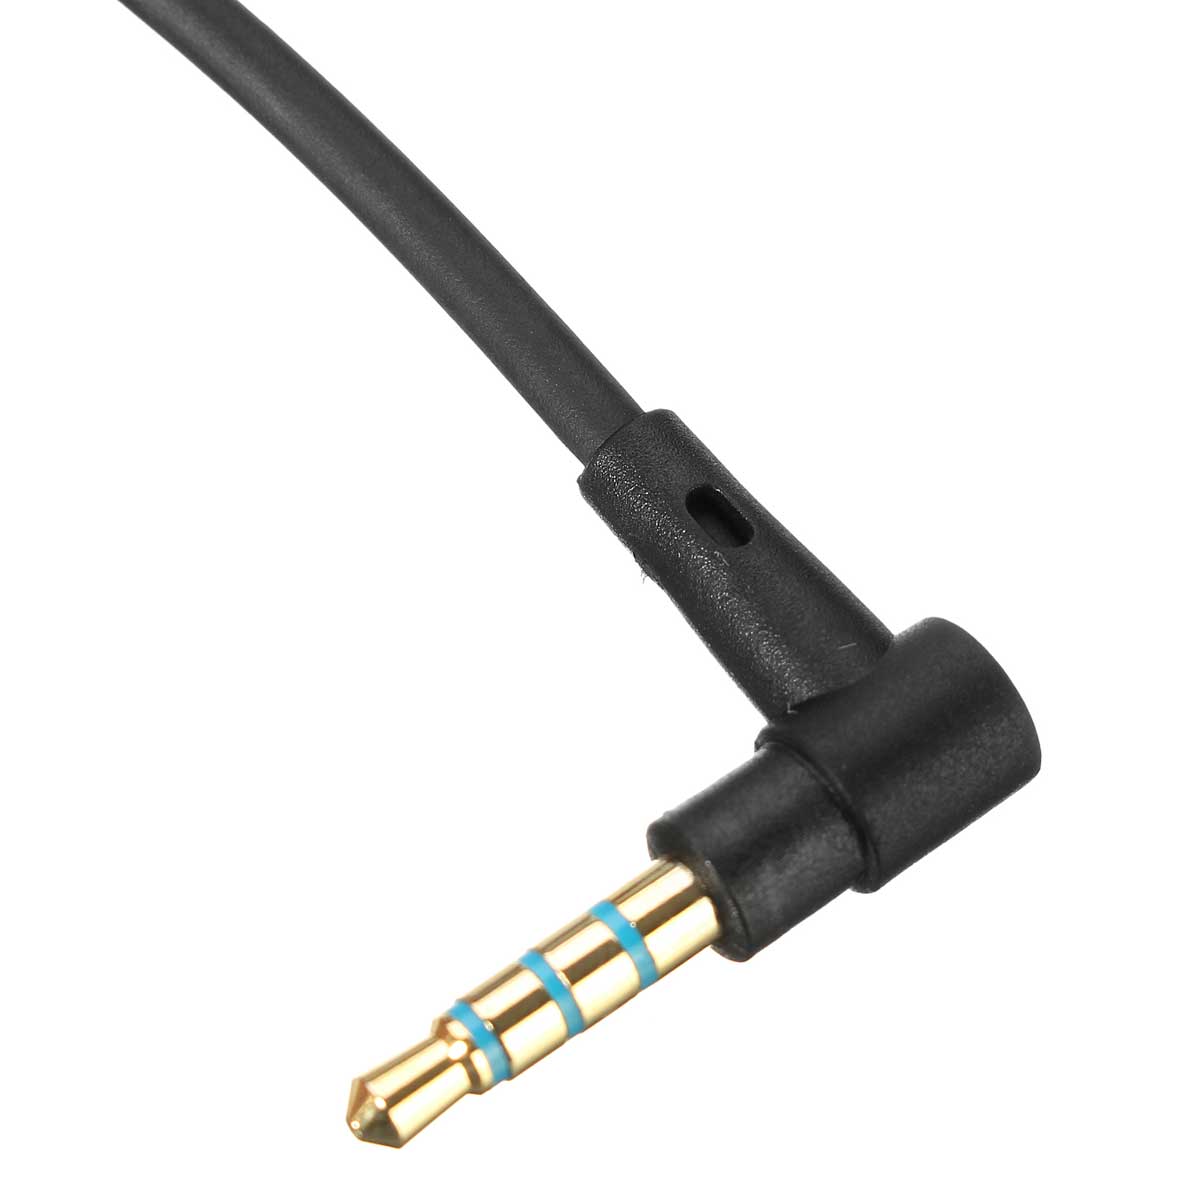 SAWAKE-Replace-Audio-25-to-35mm-Cable-for-Bose-Quiet-Comfort-QC25-Headphone-MIC-1160847